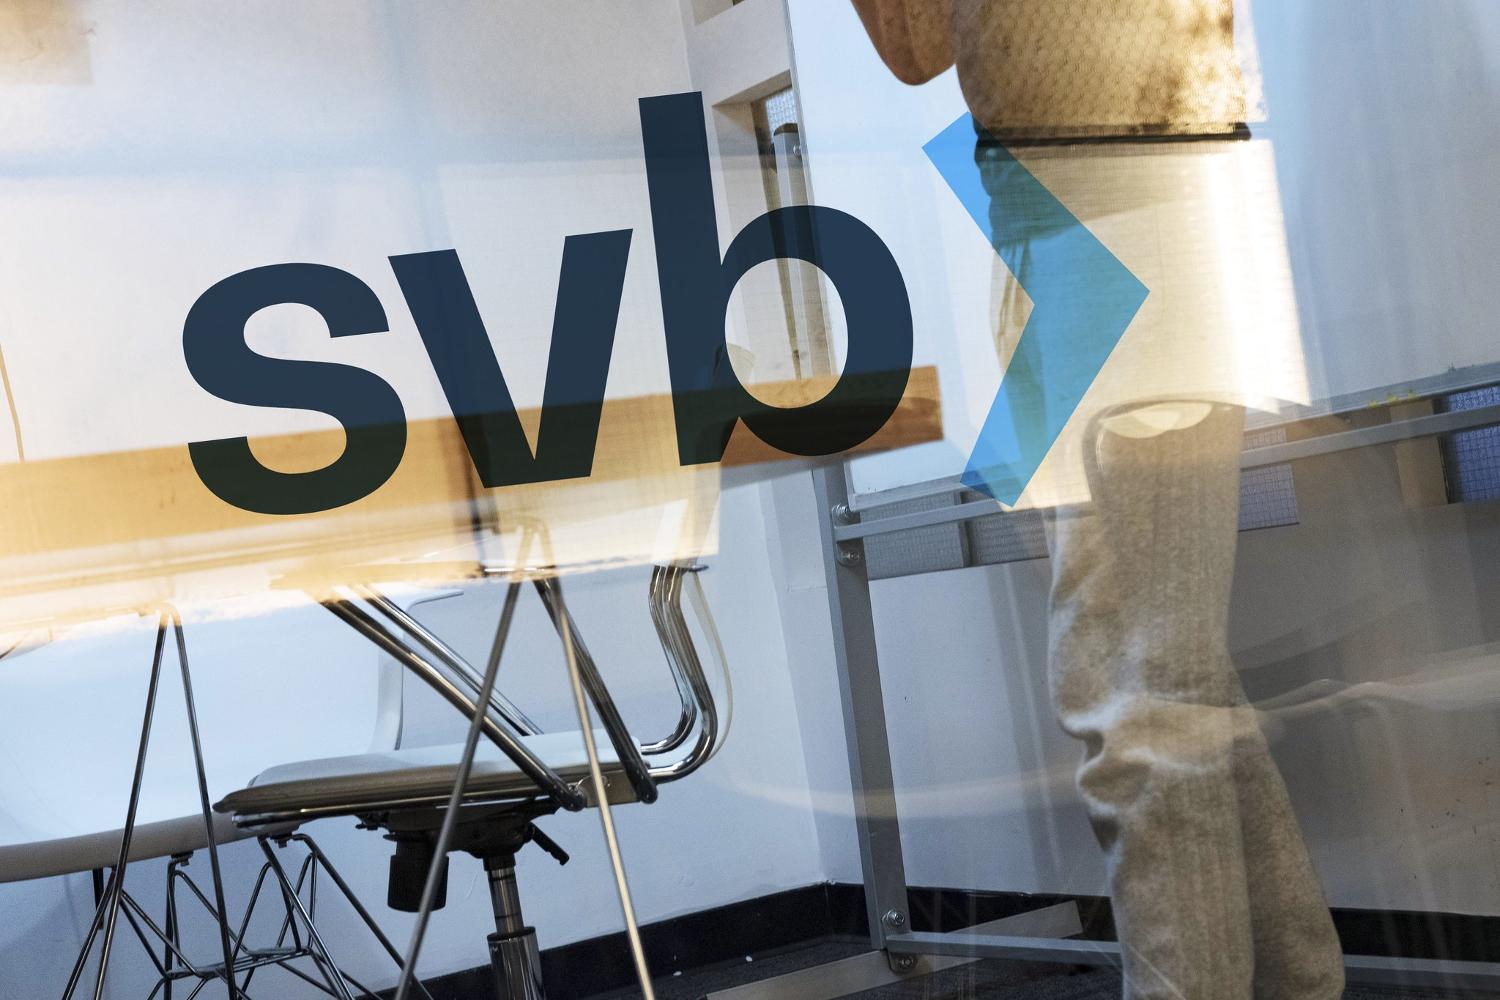 An image of a person in an office with the SVB logo overlaid.